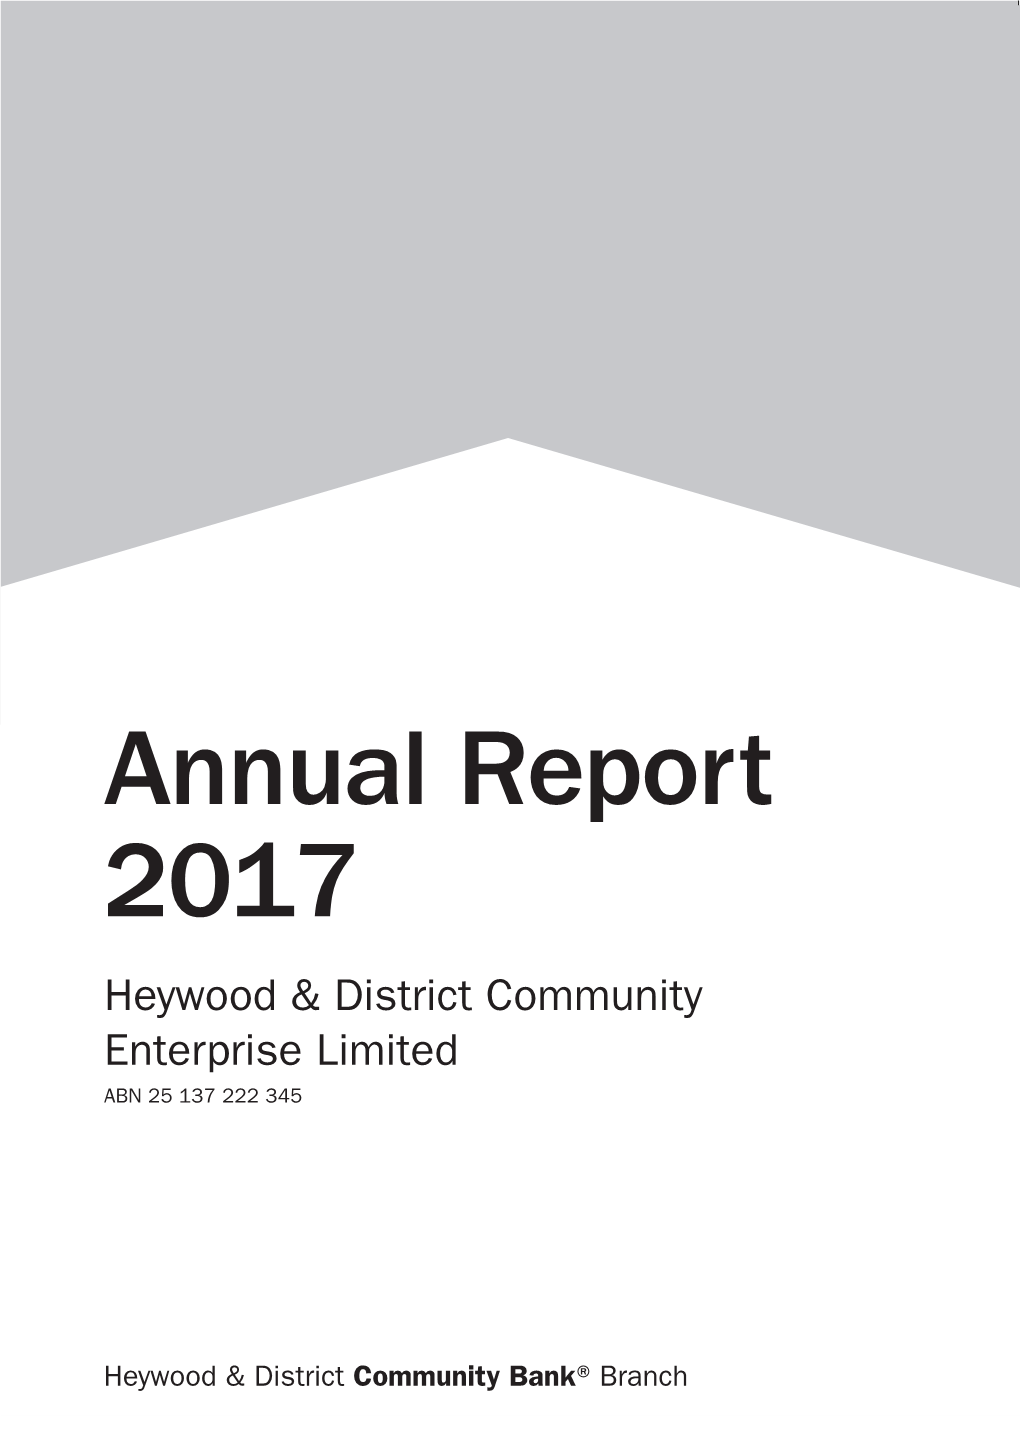 Annual Report 2017 Heywood & District Community Enterprise Limited ABN 25 137 222 345